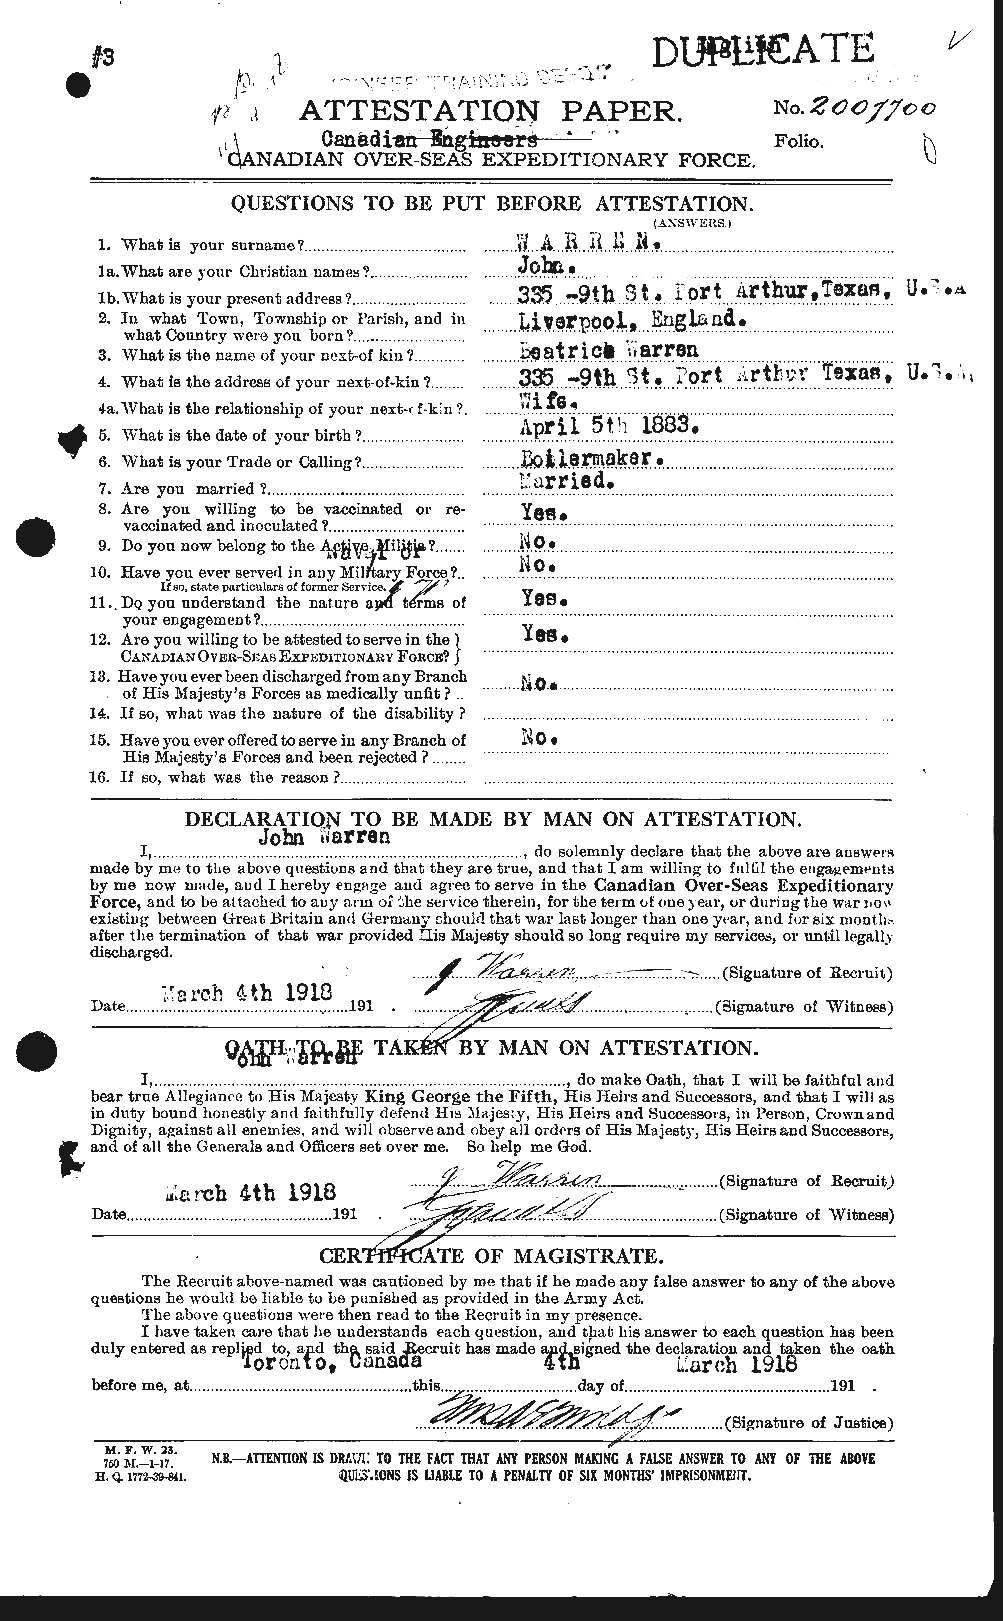 Personnel Records of the First World War - CEF 658540a